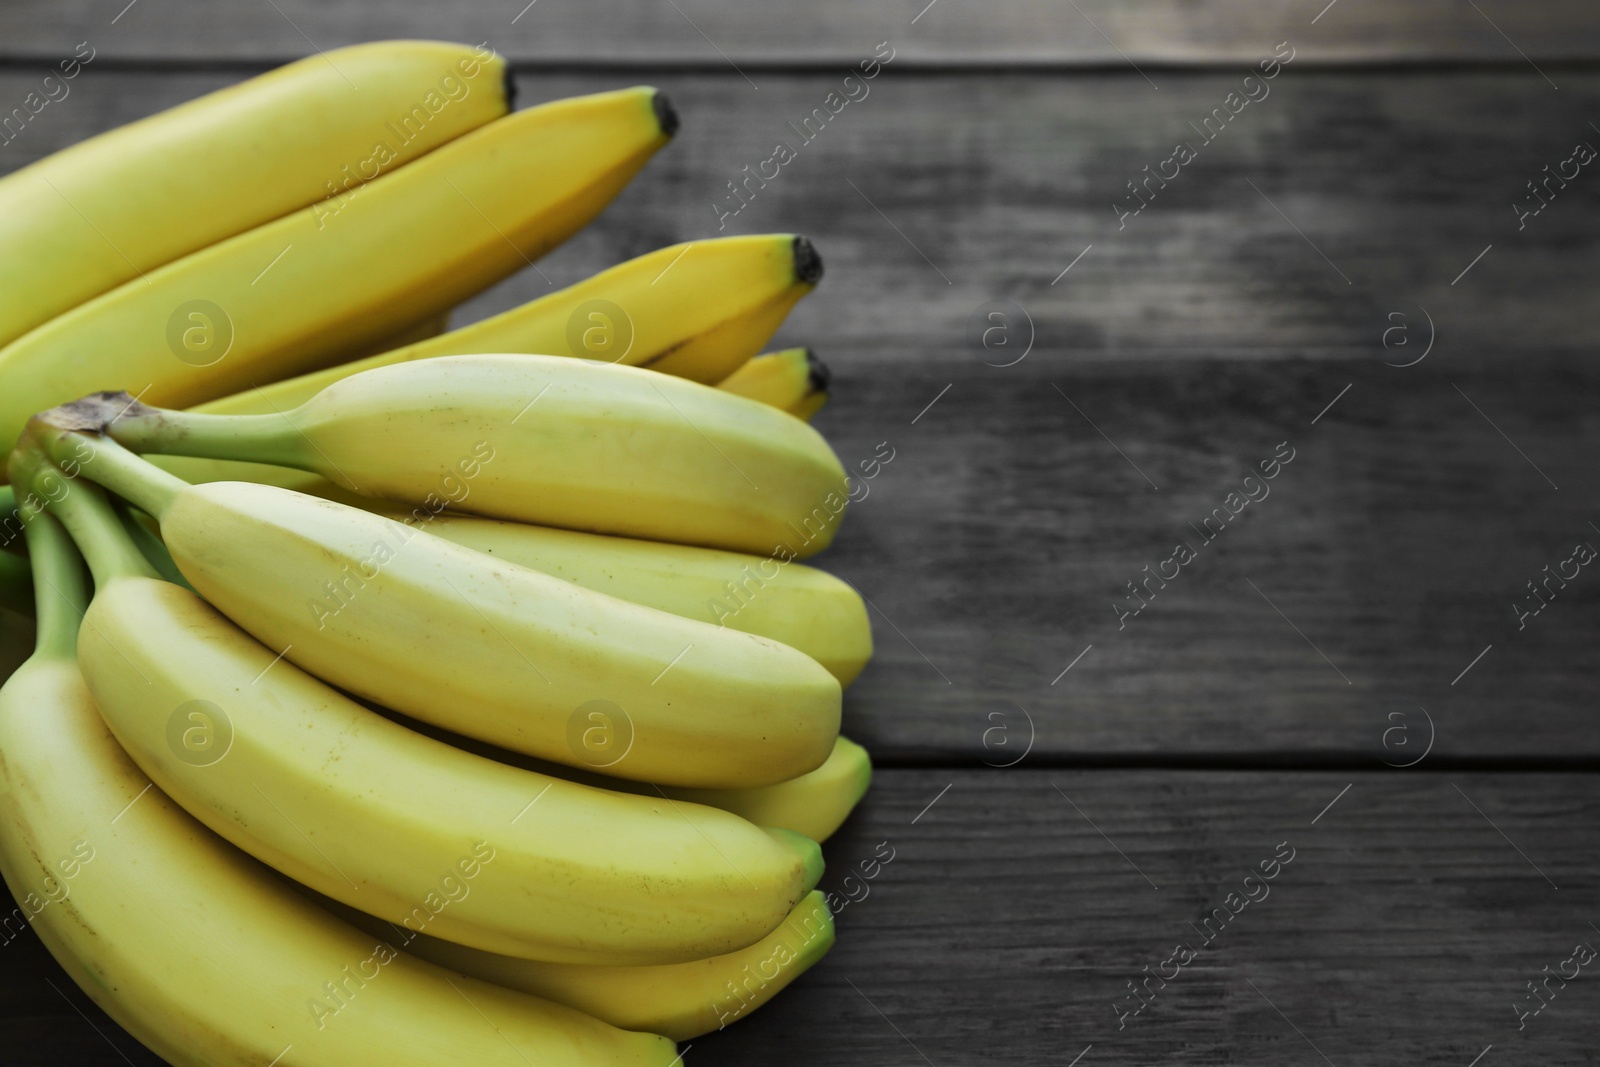 Photo of Ripe yellow bananas on wooden table. Space for text